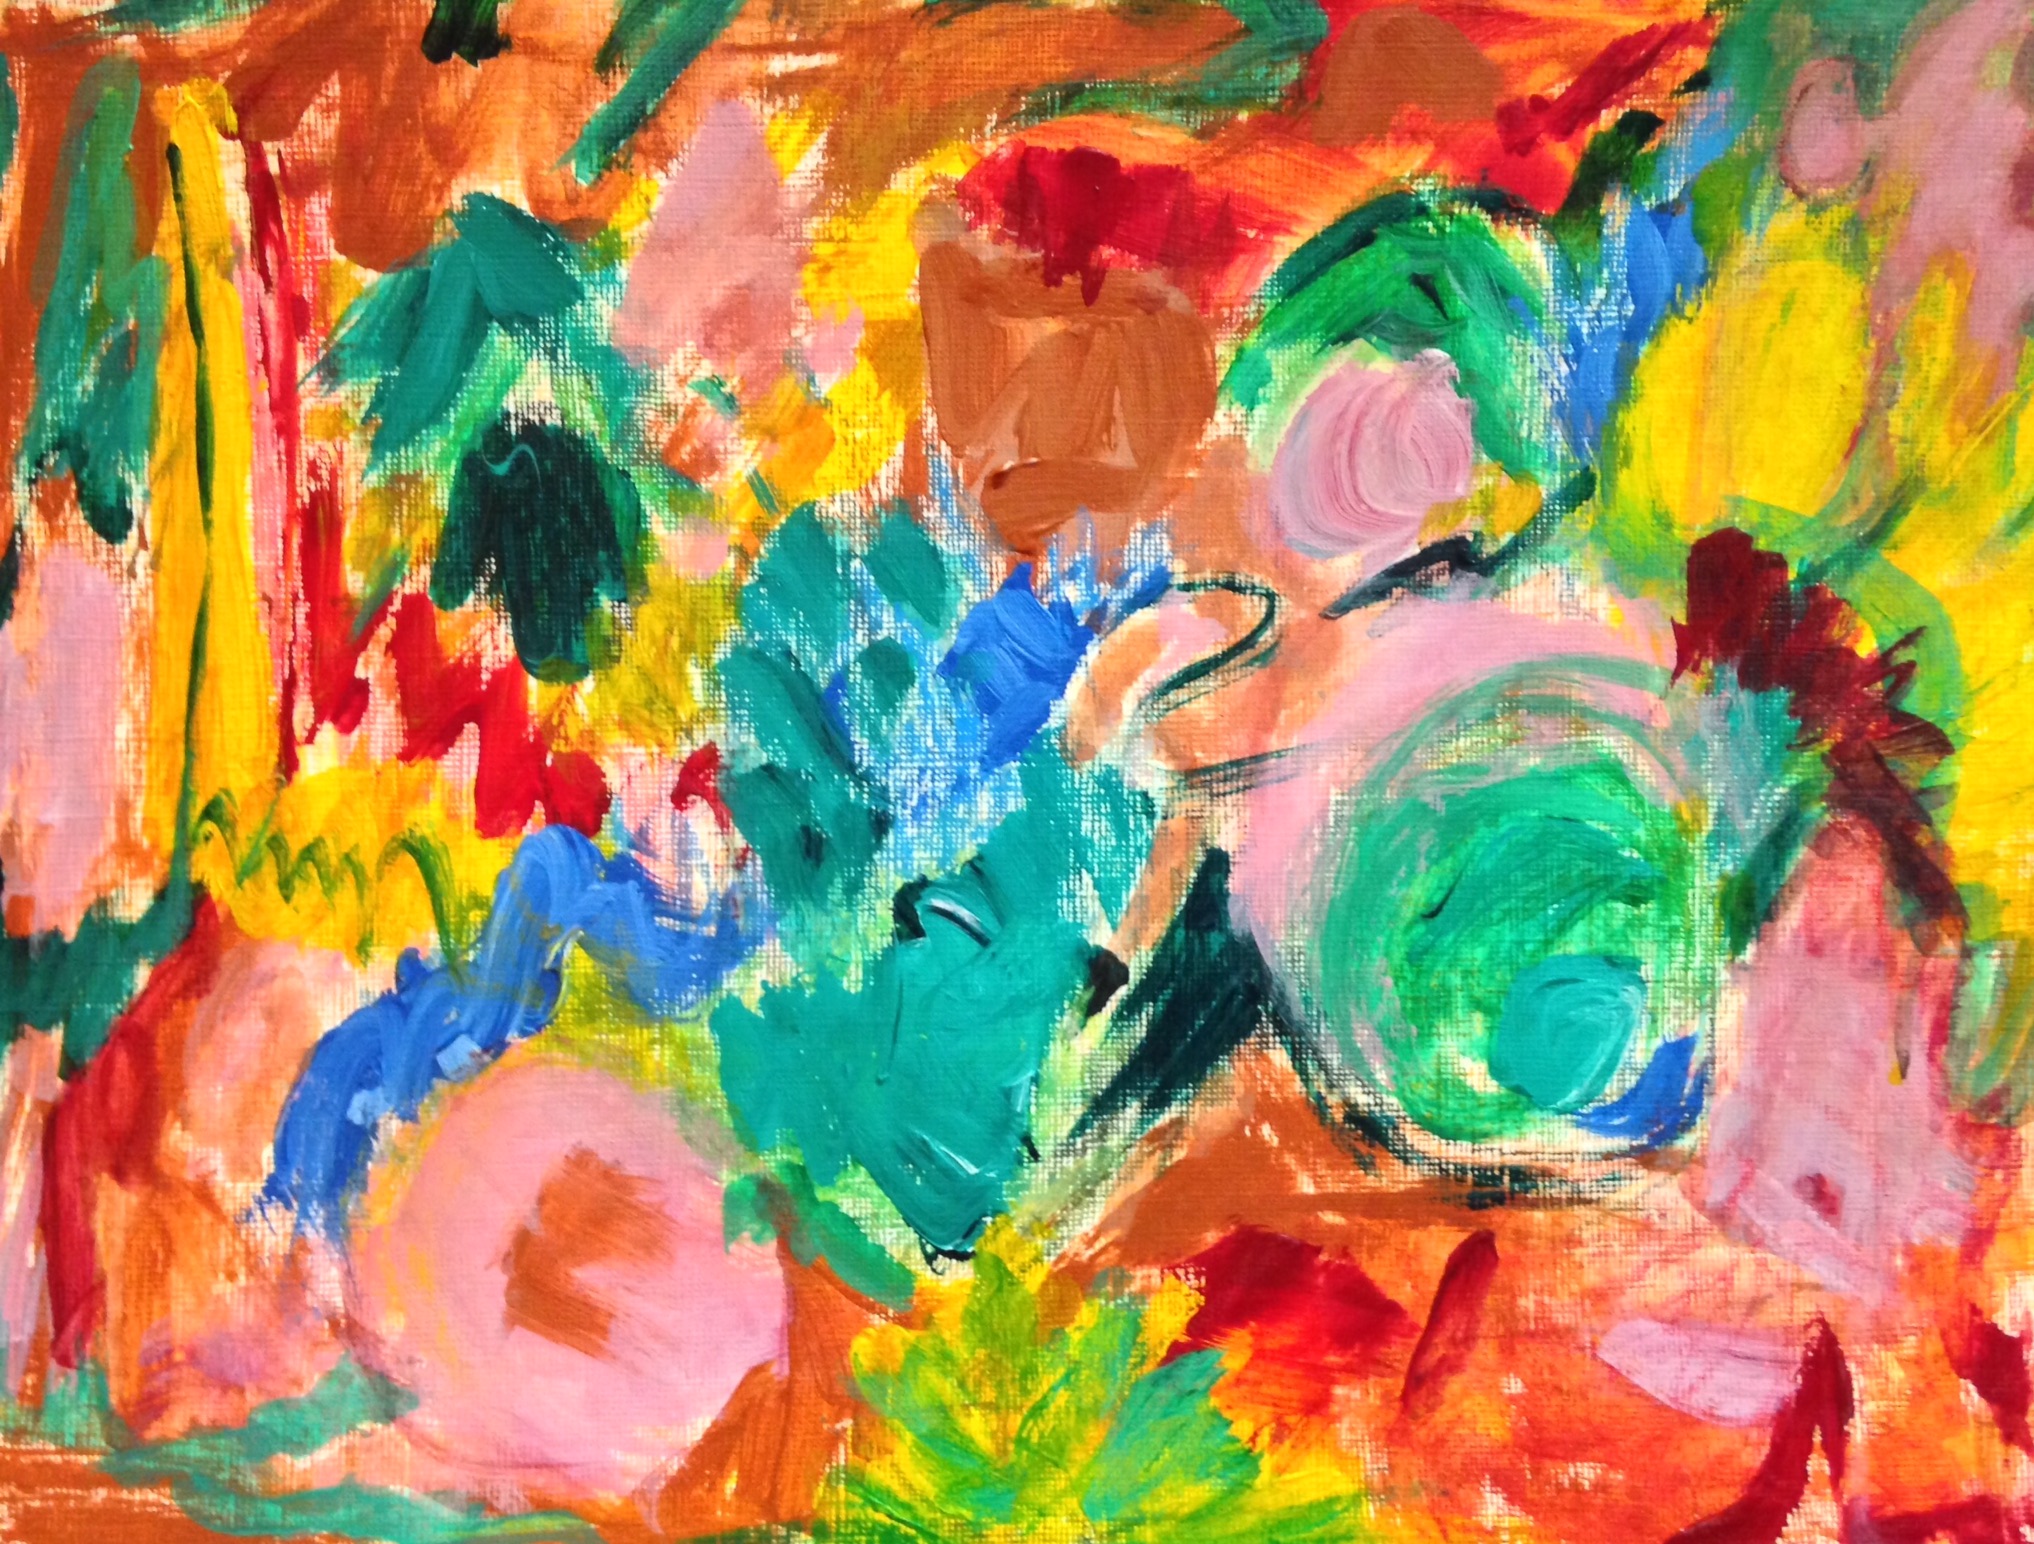 “Market flowers” 12” x 9” acrylic and oil pastel on canvas paper